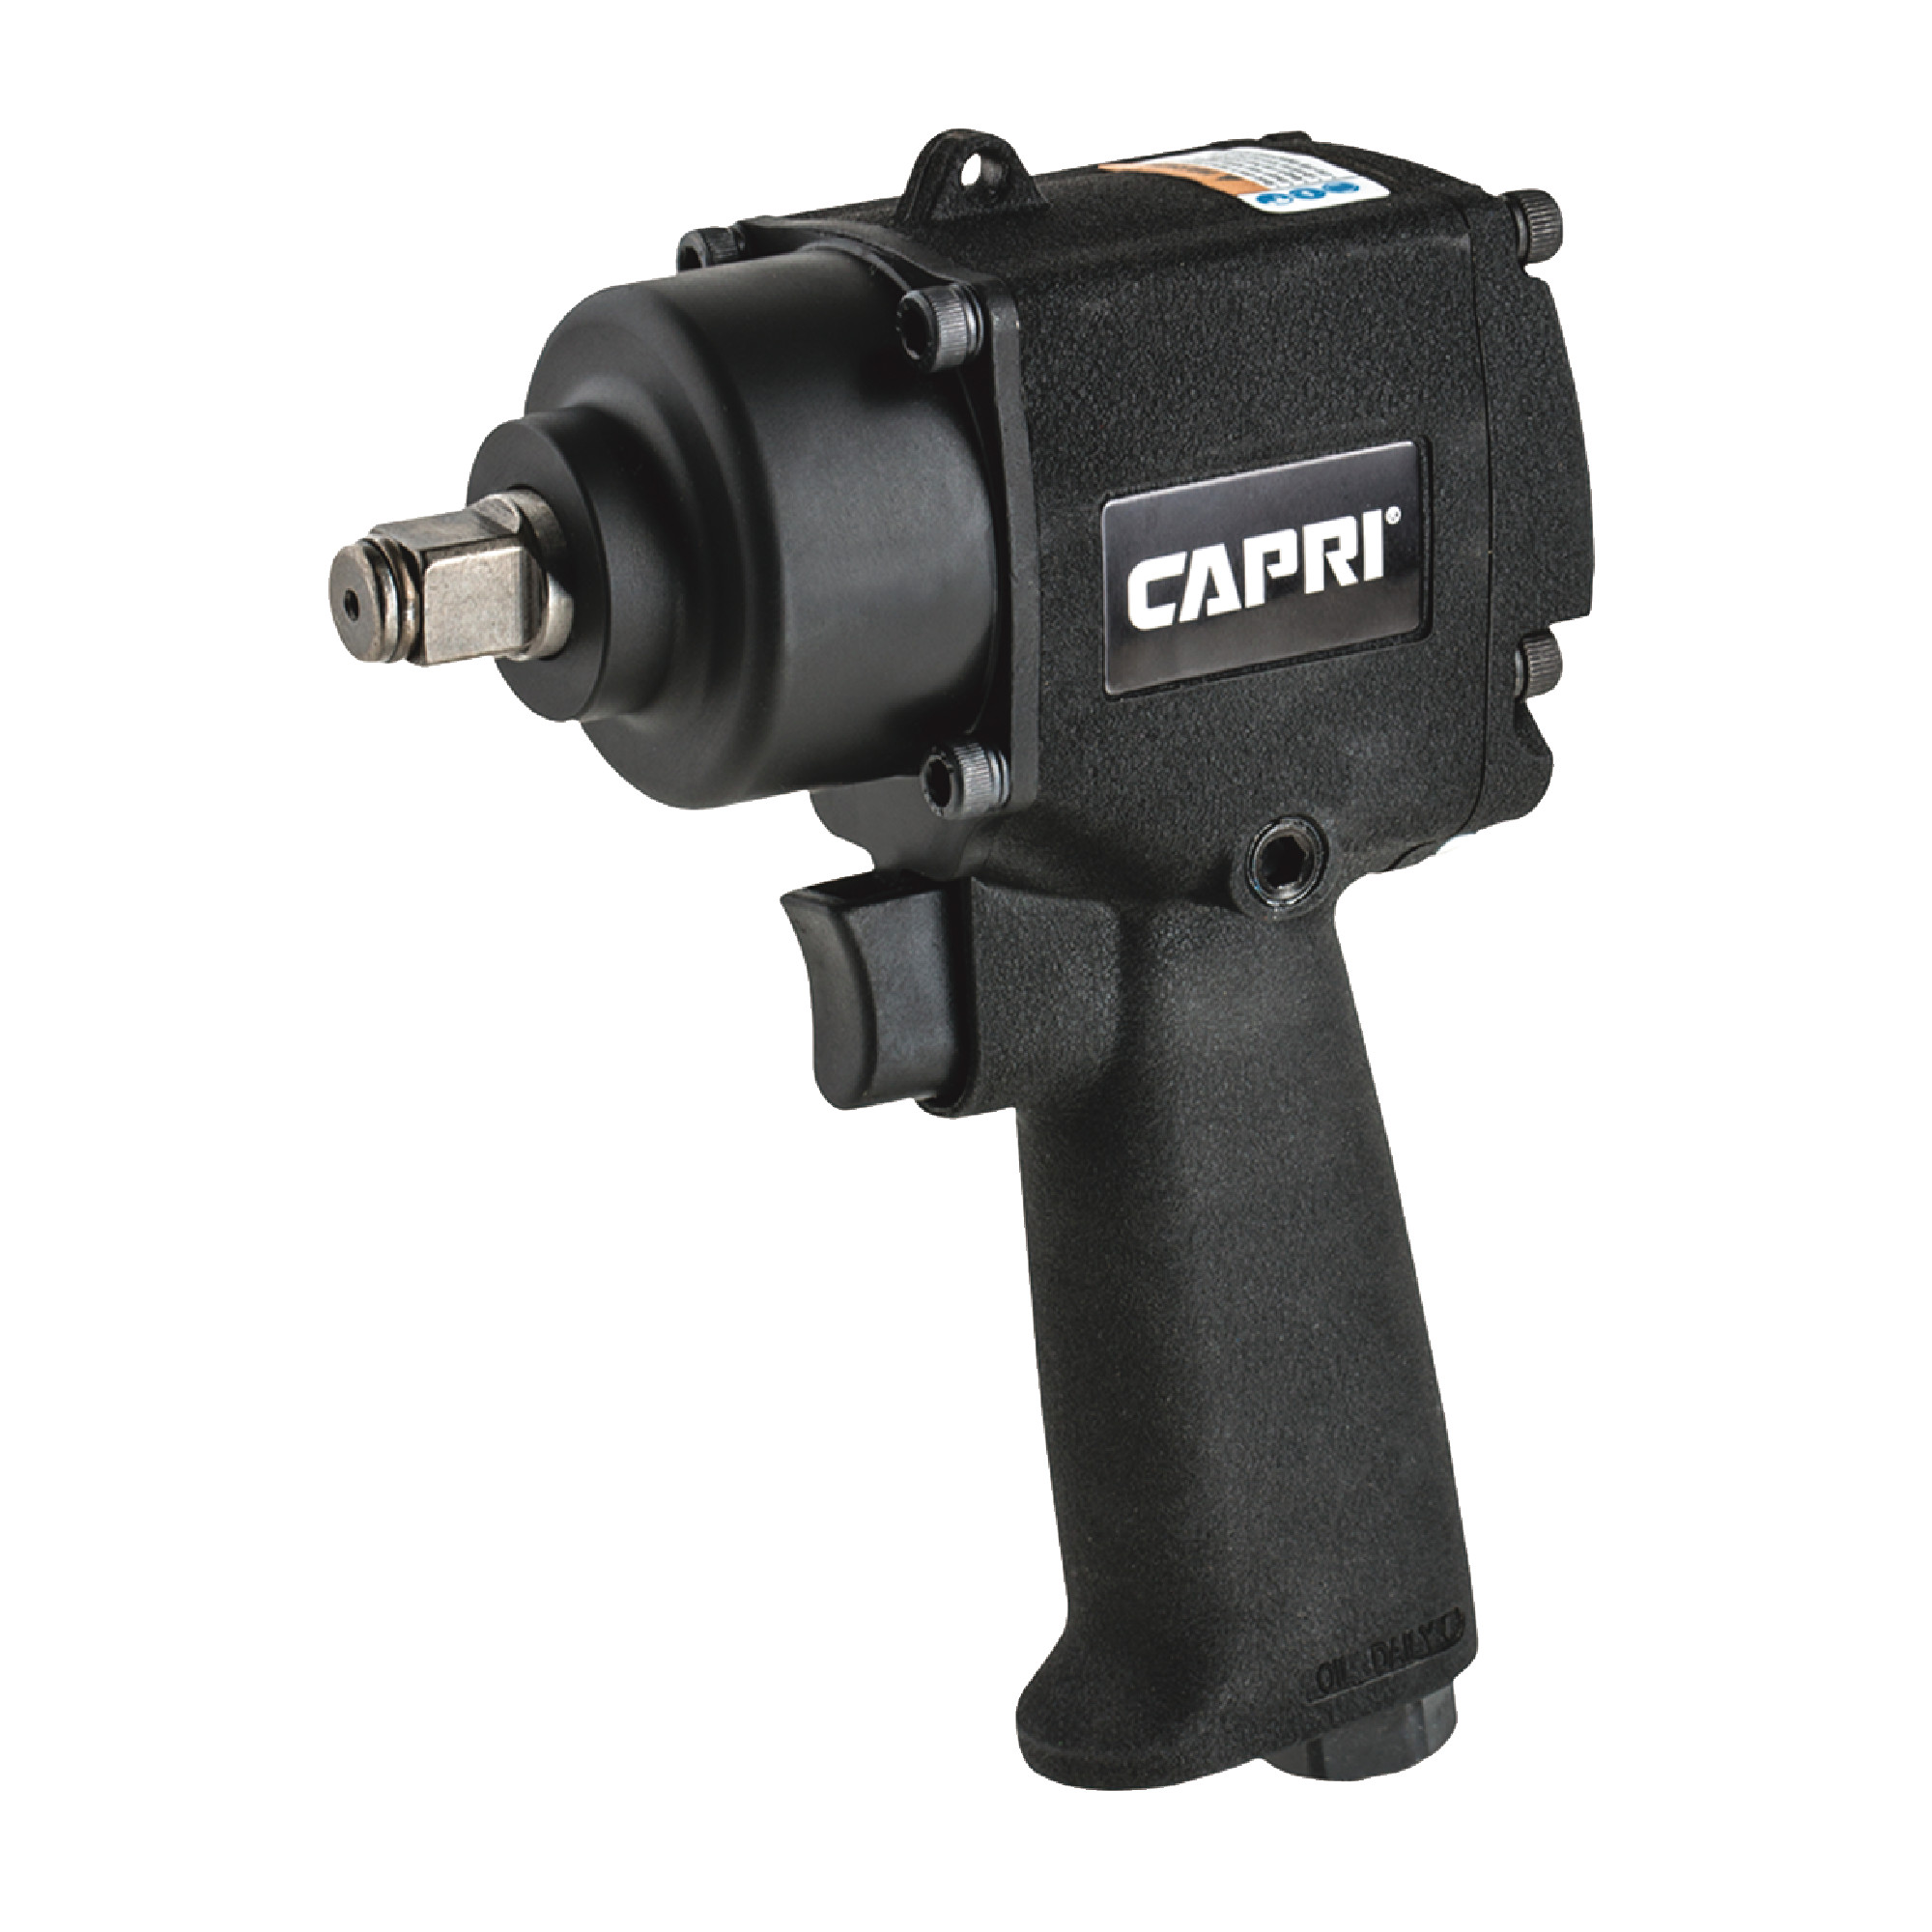 3/8" Compact Impact Wrench